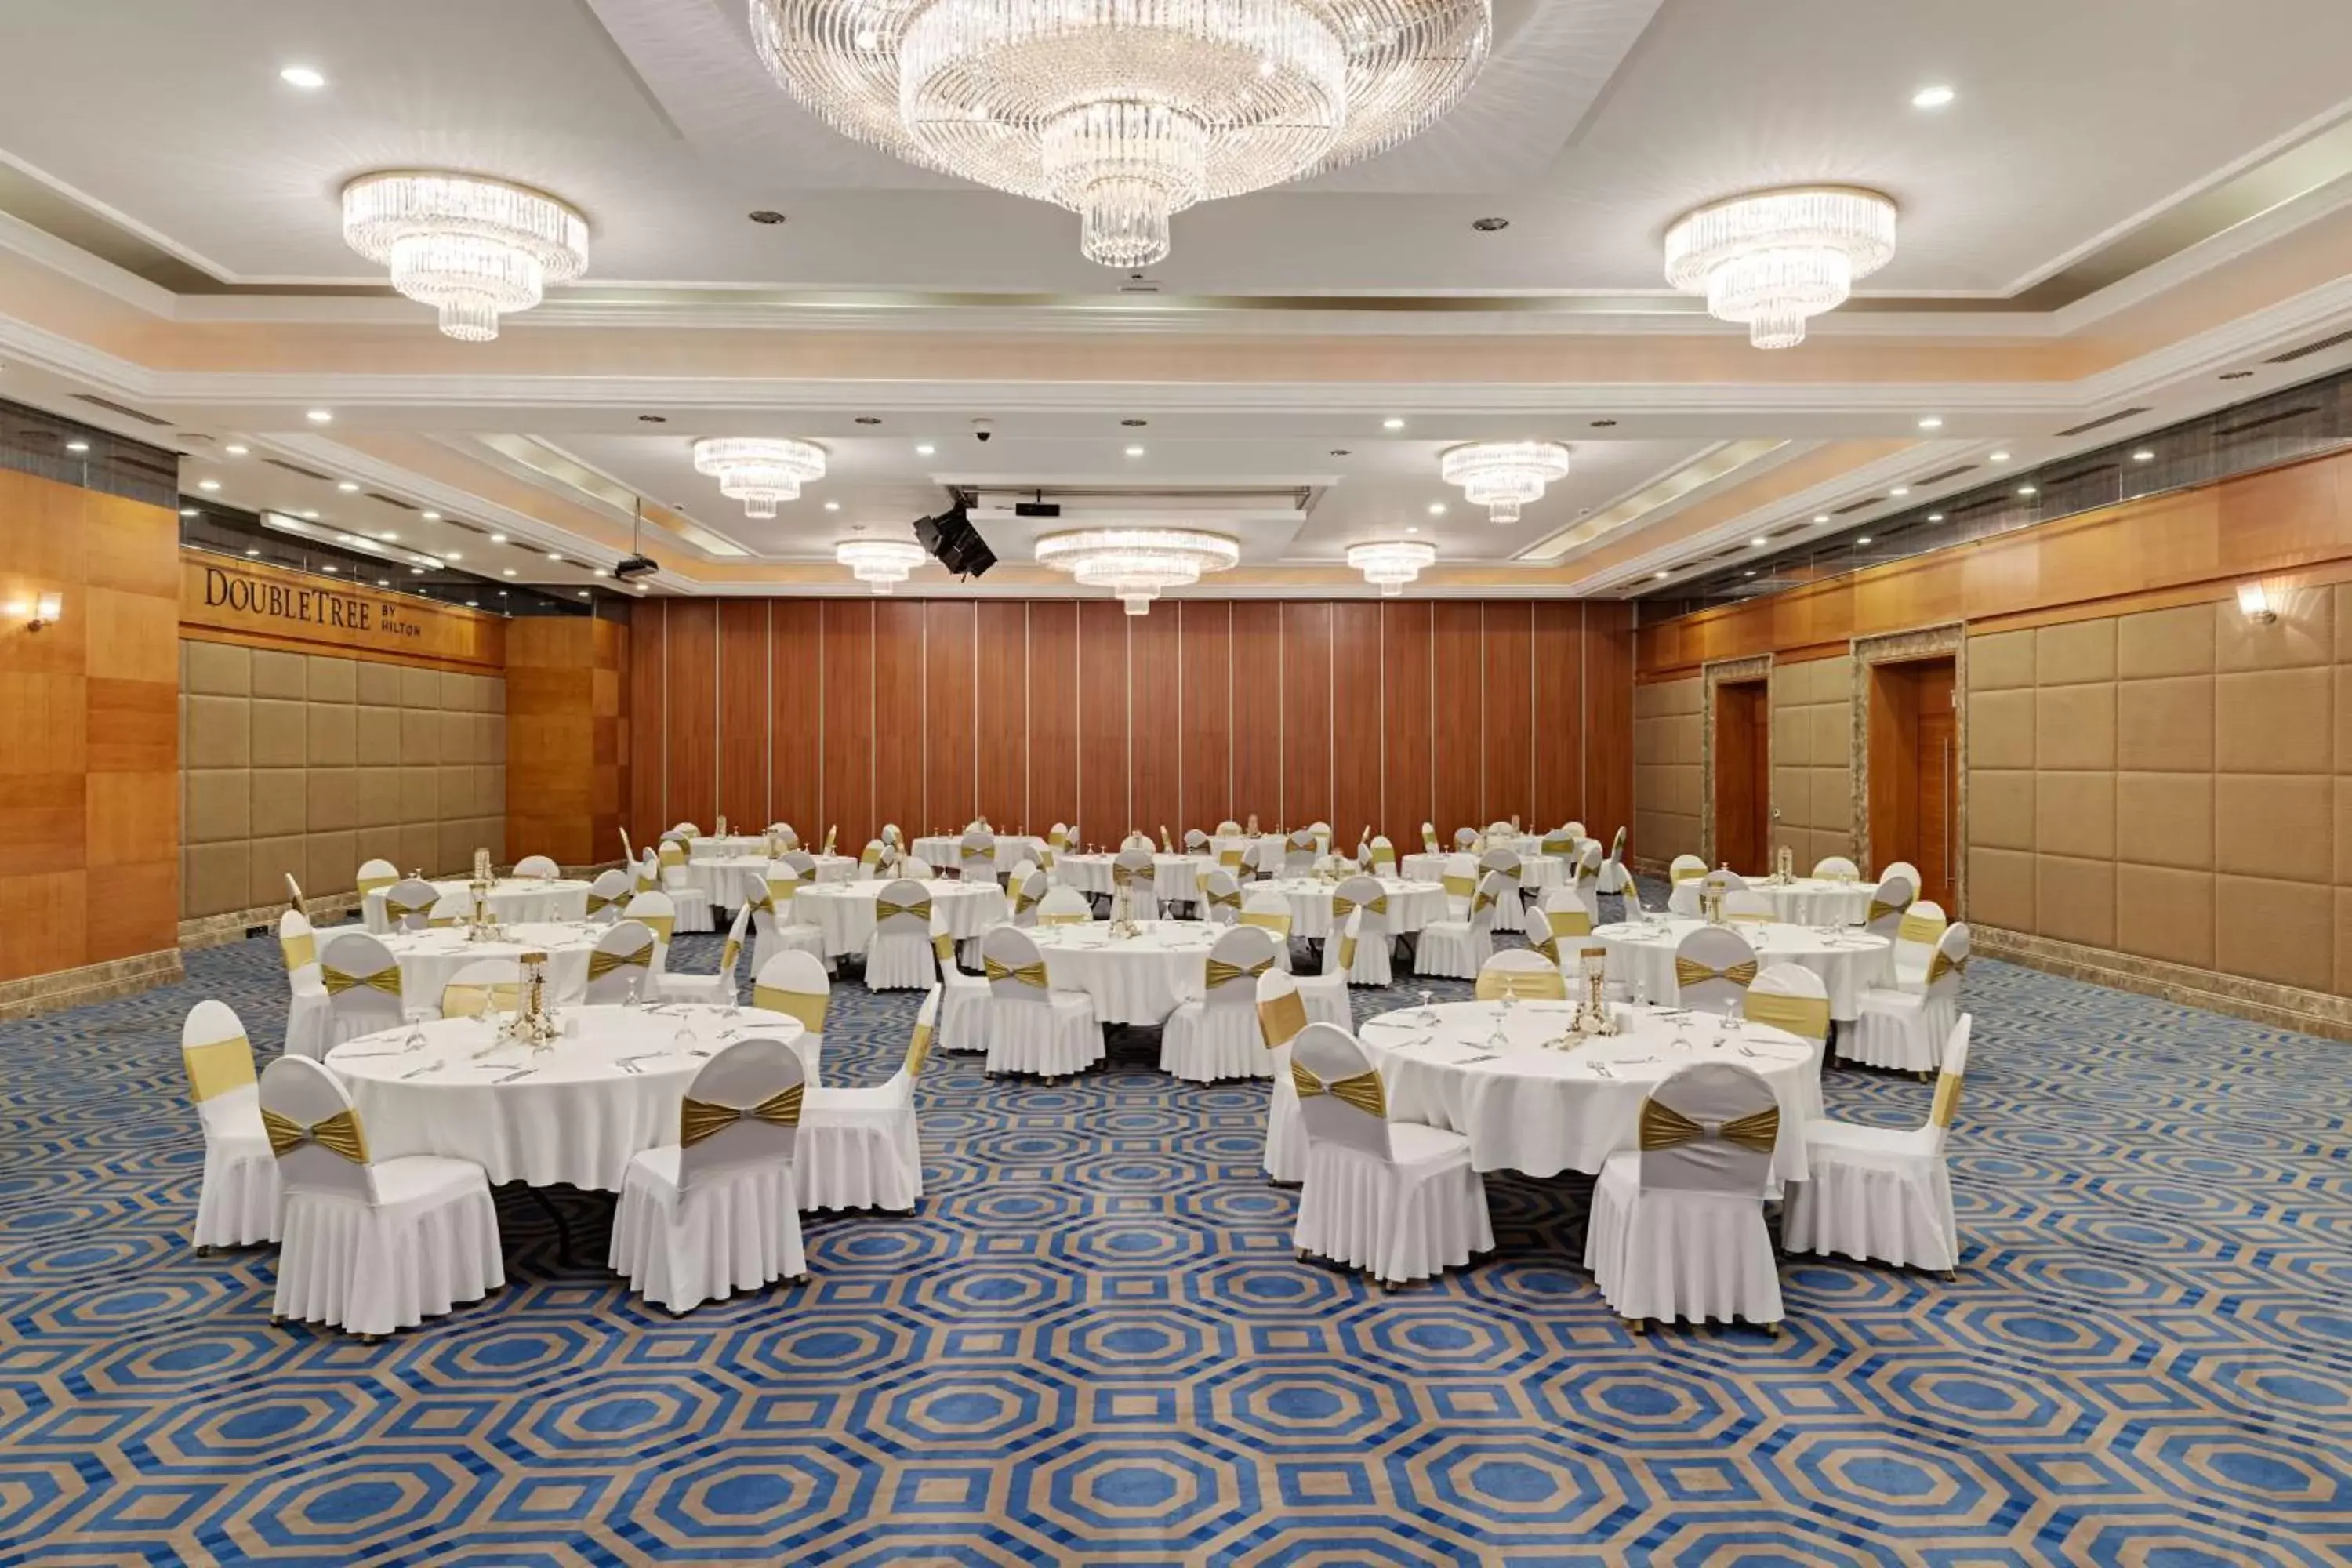 Meeting/conference room, Banquet Facilities in Doubletree by Hilton Van